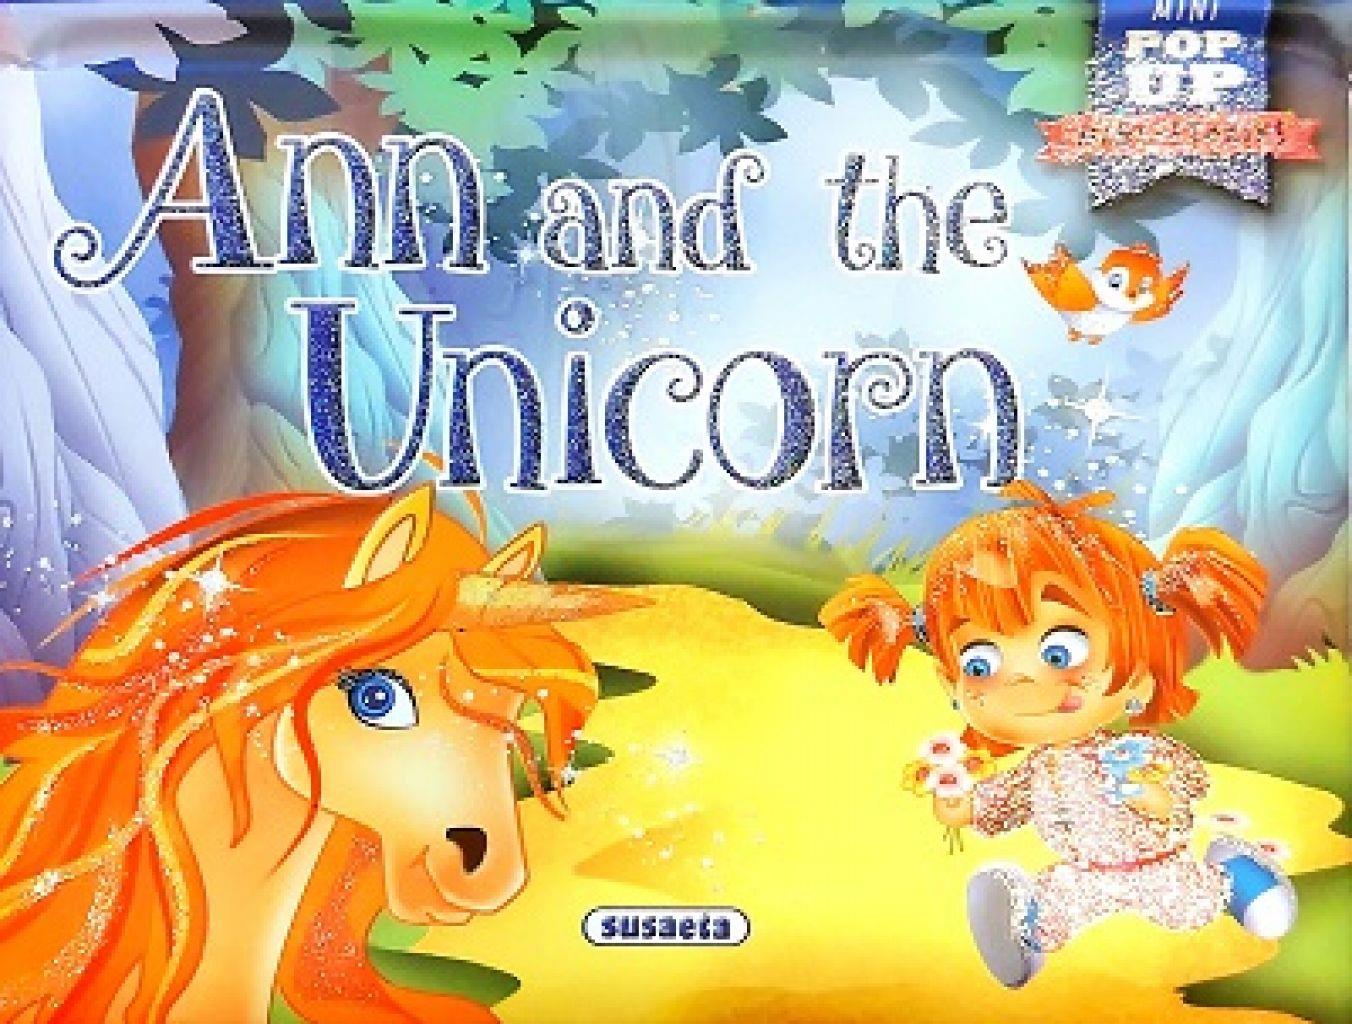 Mini-Stories pop up - Ann and the unicorn